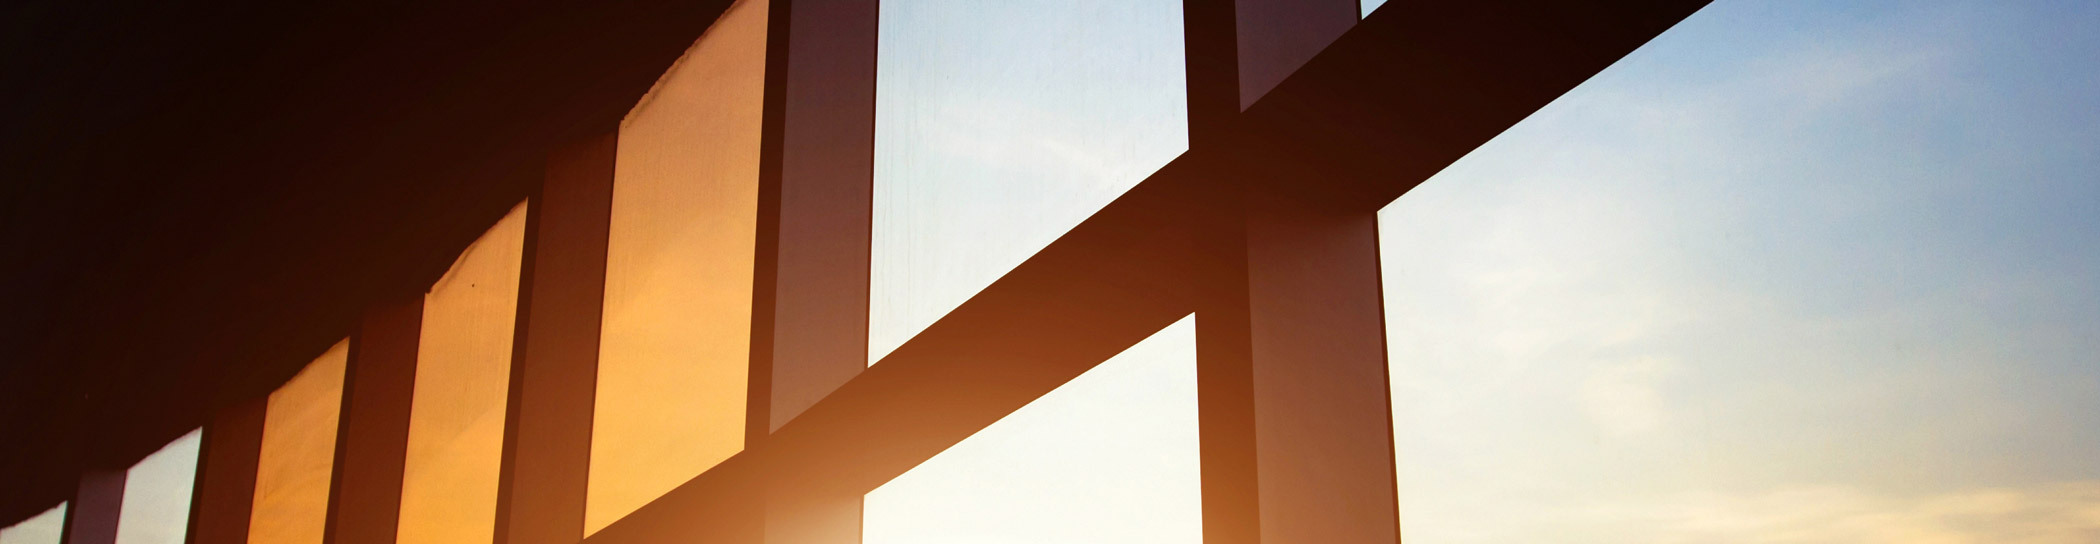 A photograph of a sunset viewed through the silhouette of a geometric window structure, with the sun casting warm hues across the sky and creating a contrast between the dark window frame and the illuminated outside.